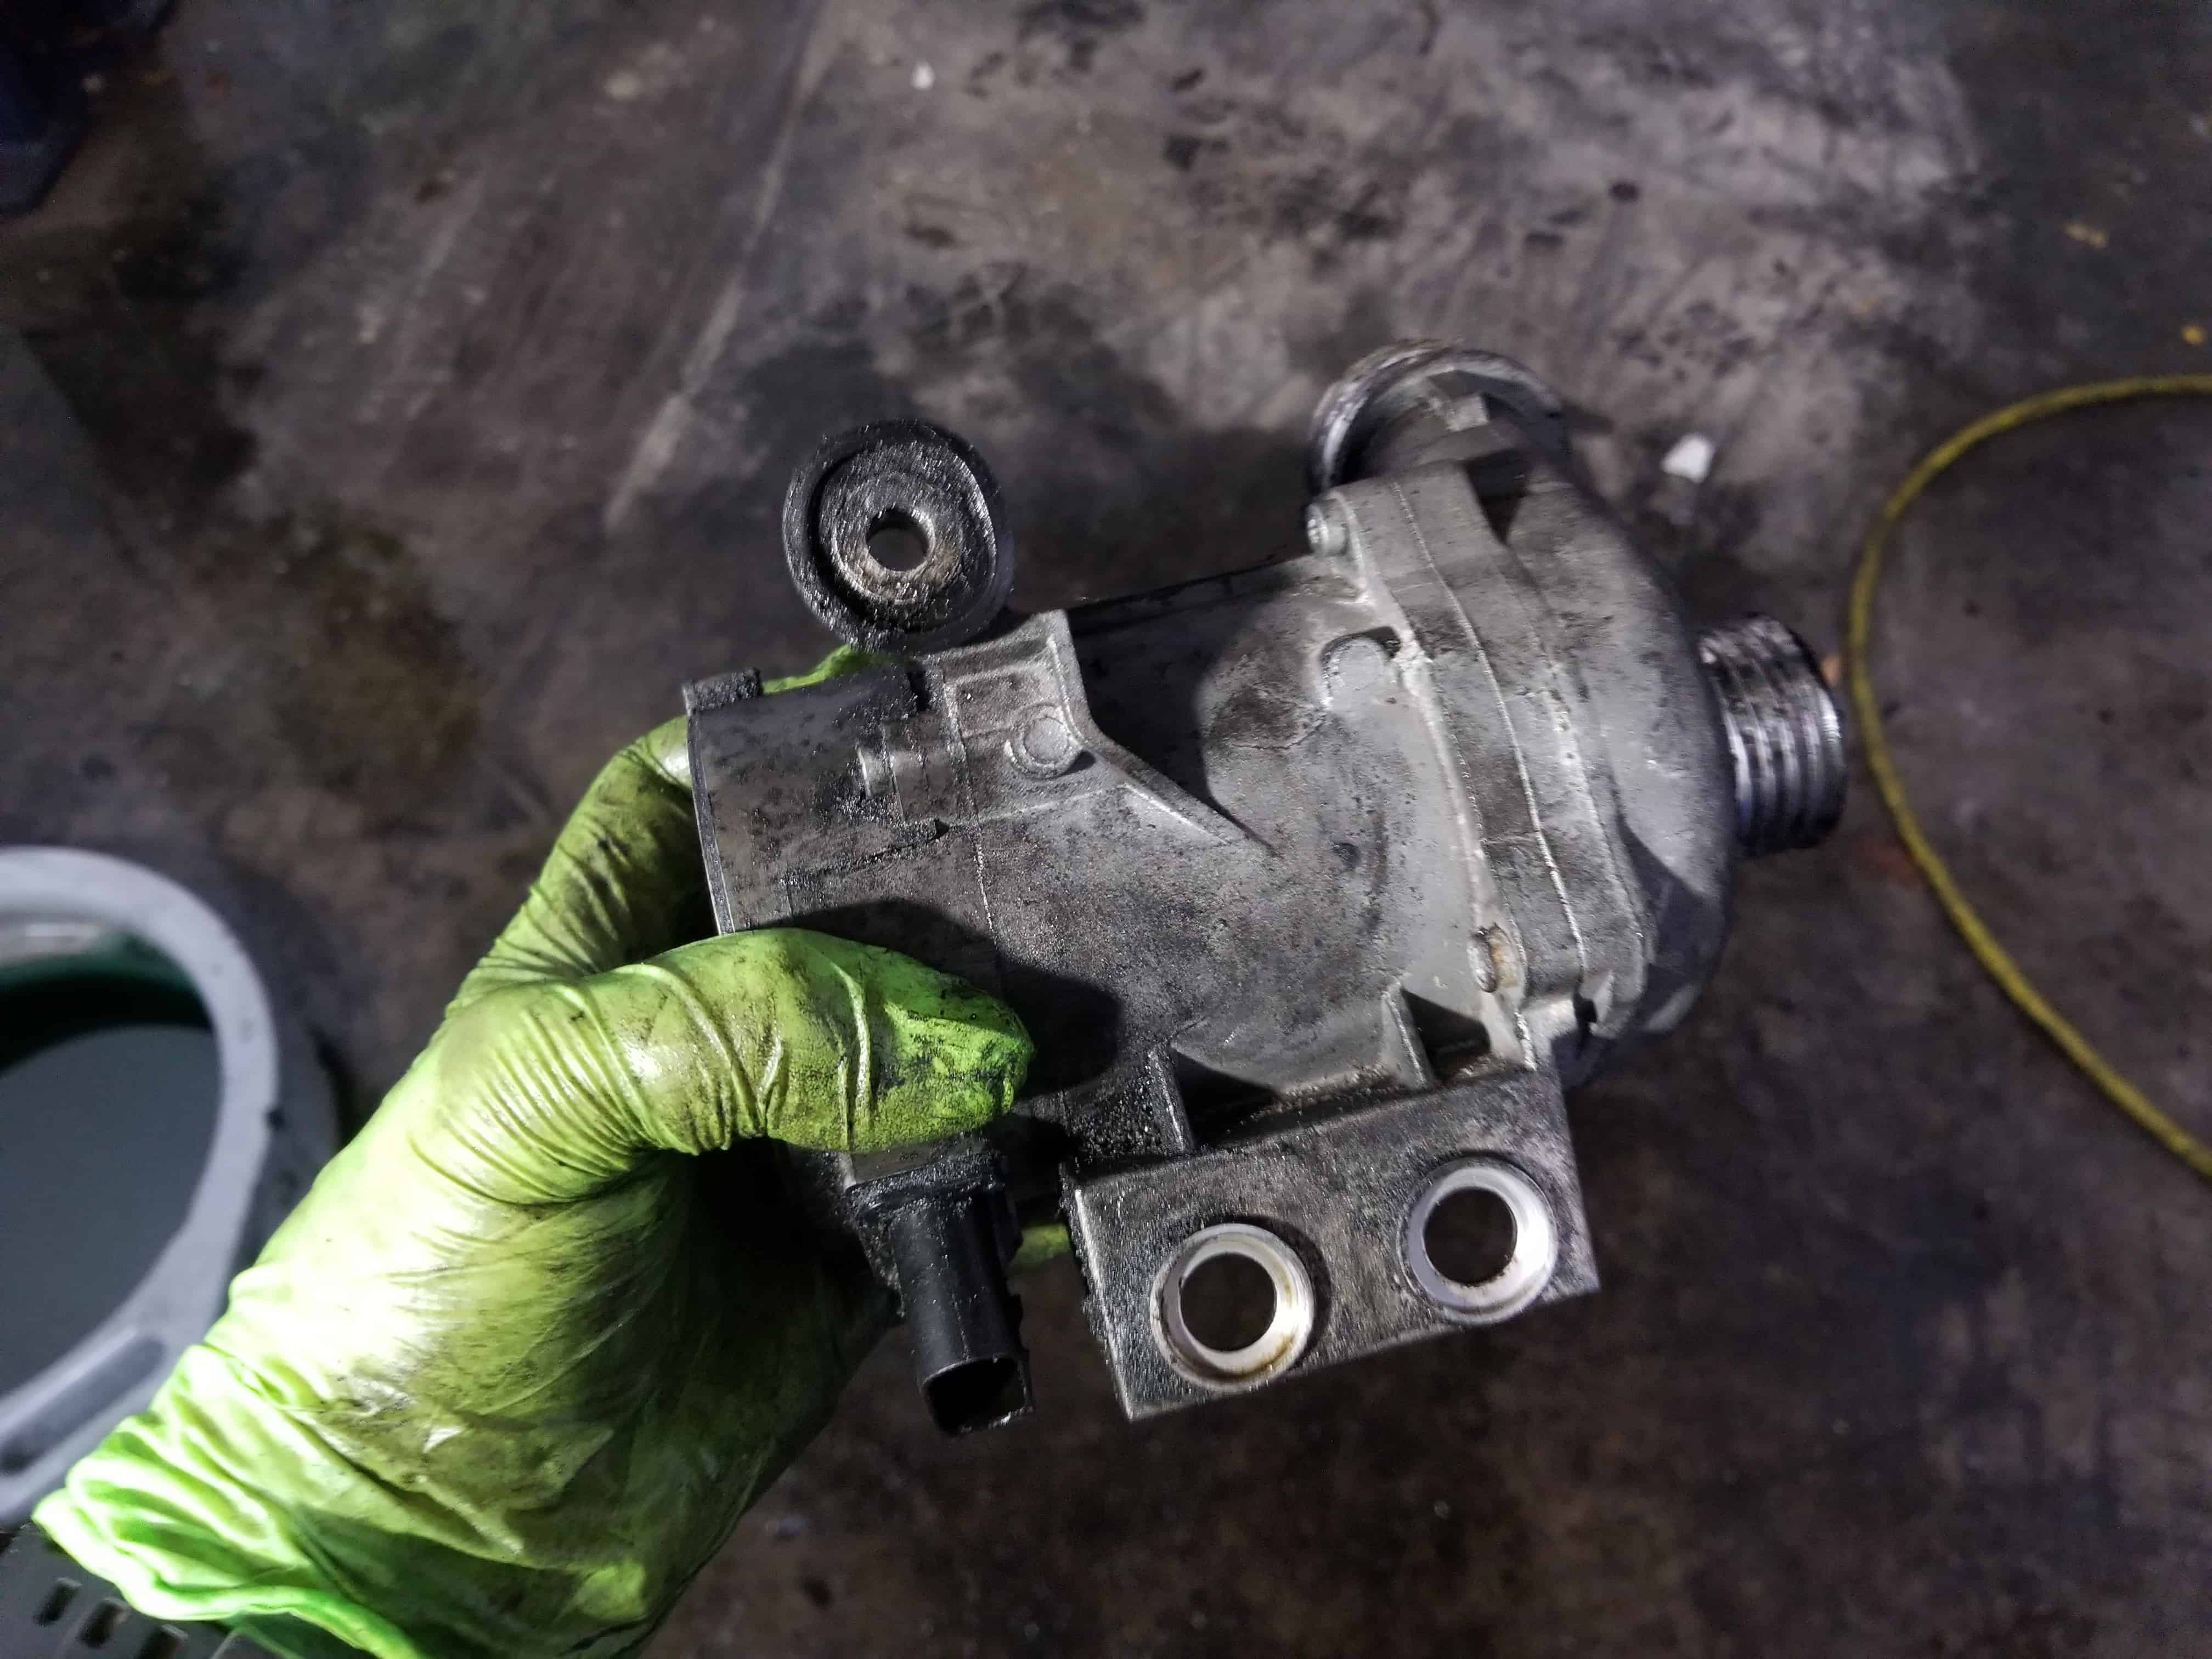 bmw e60 water pump replacement - Remove the water pump from the vehicle